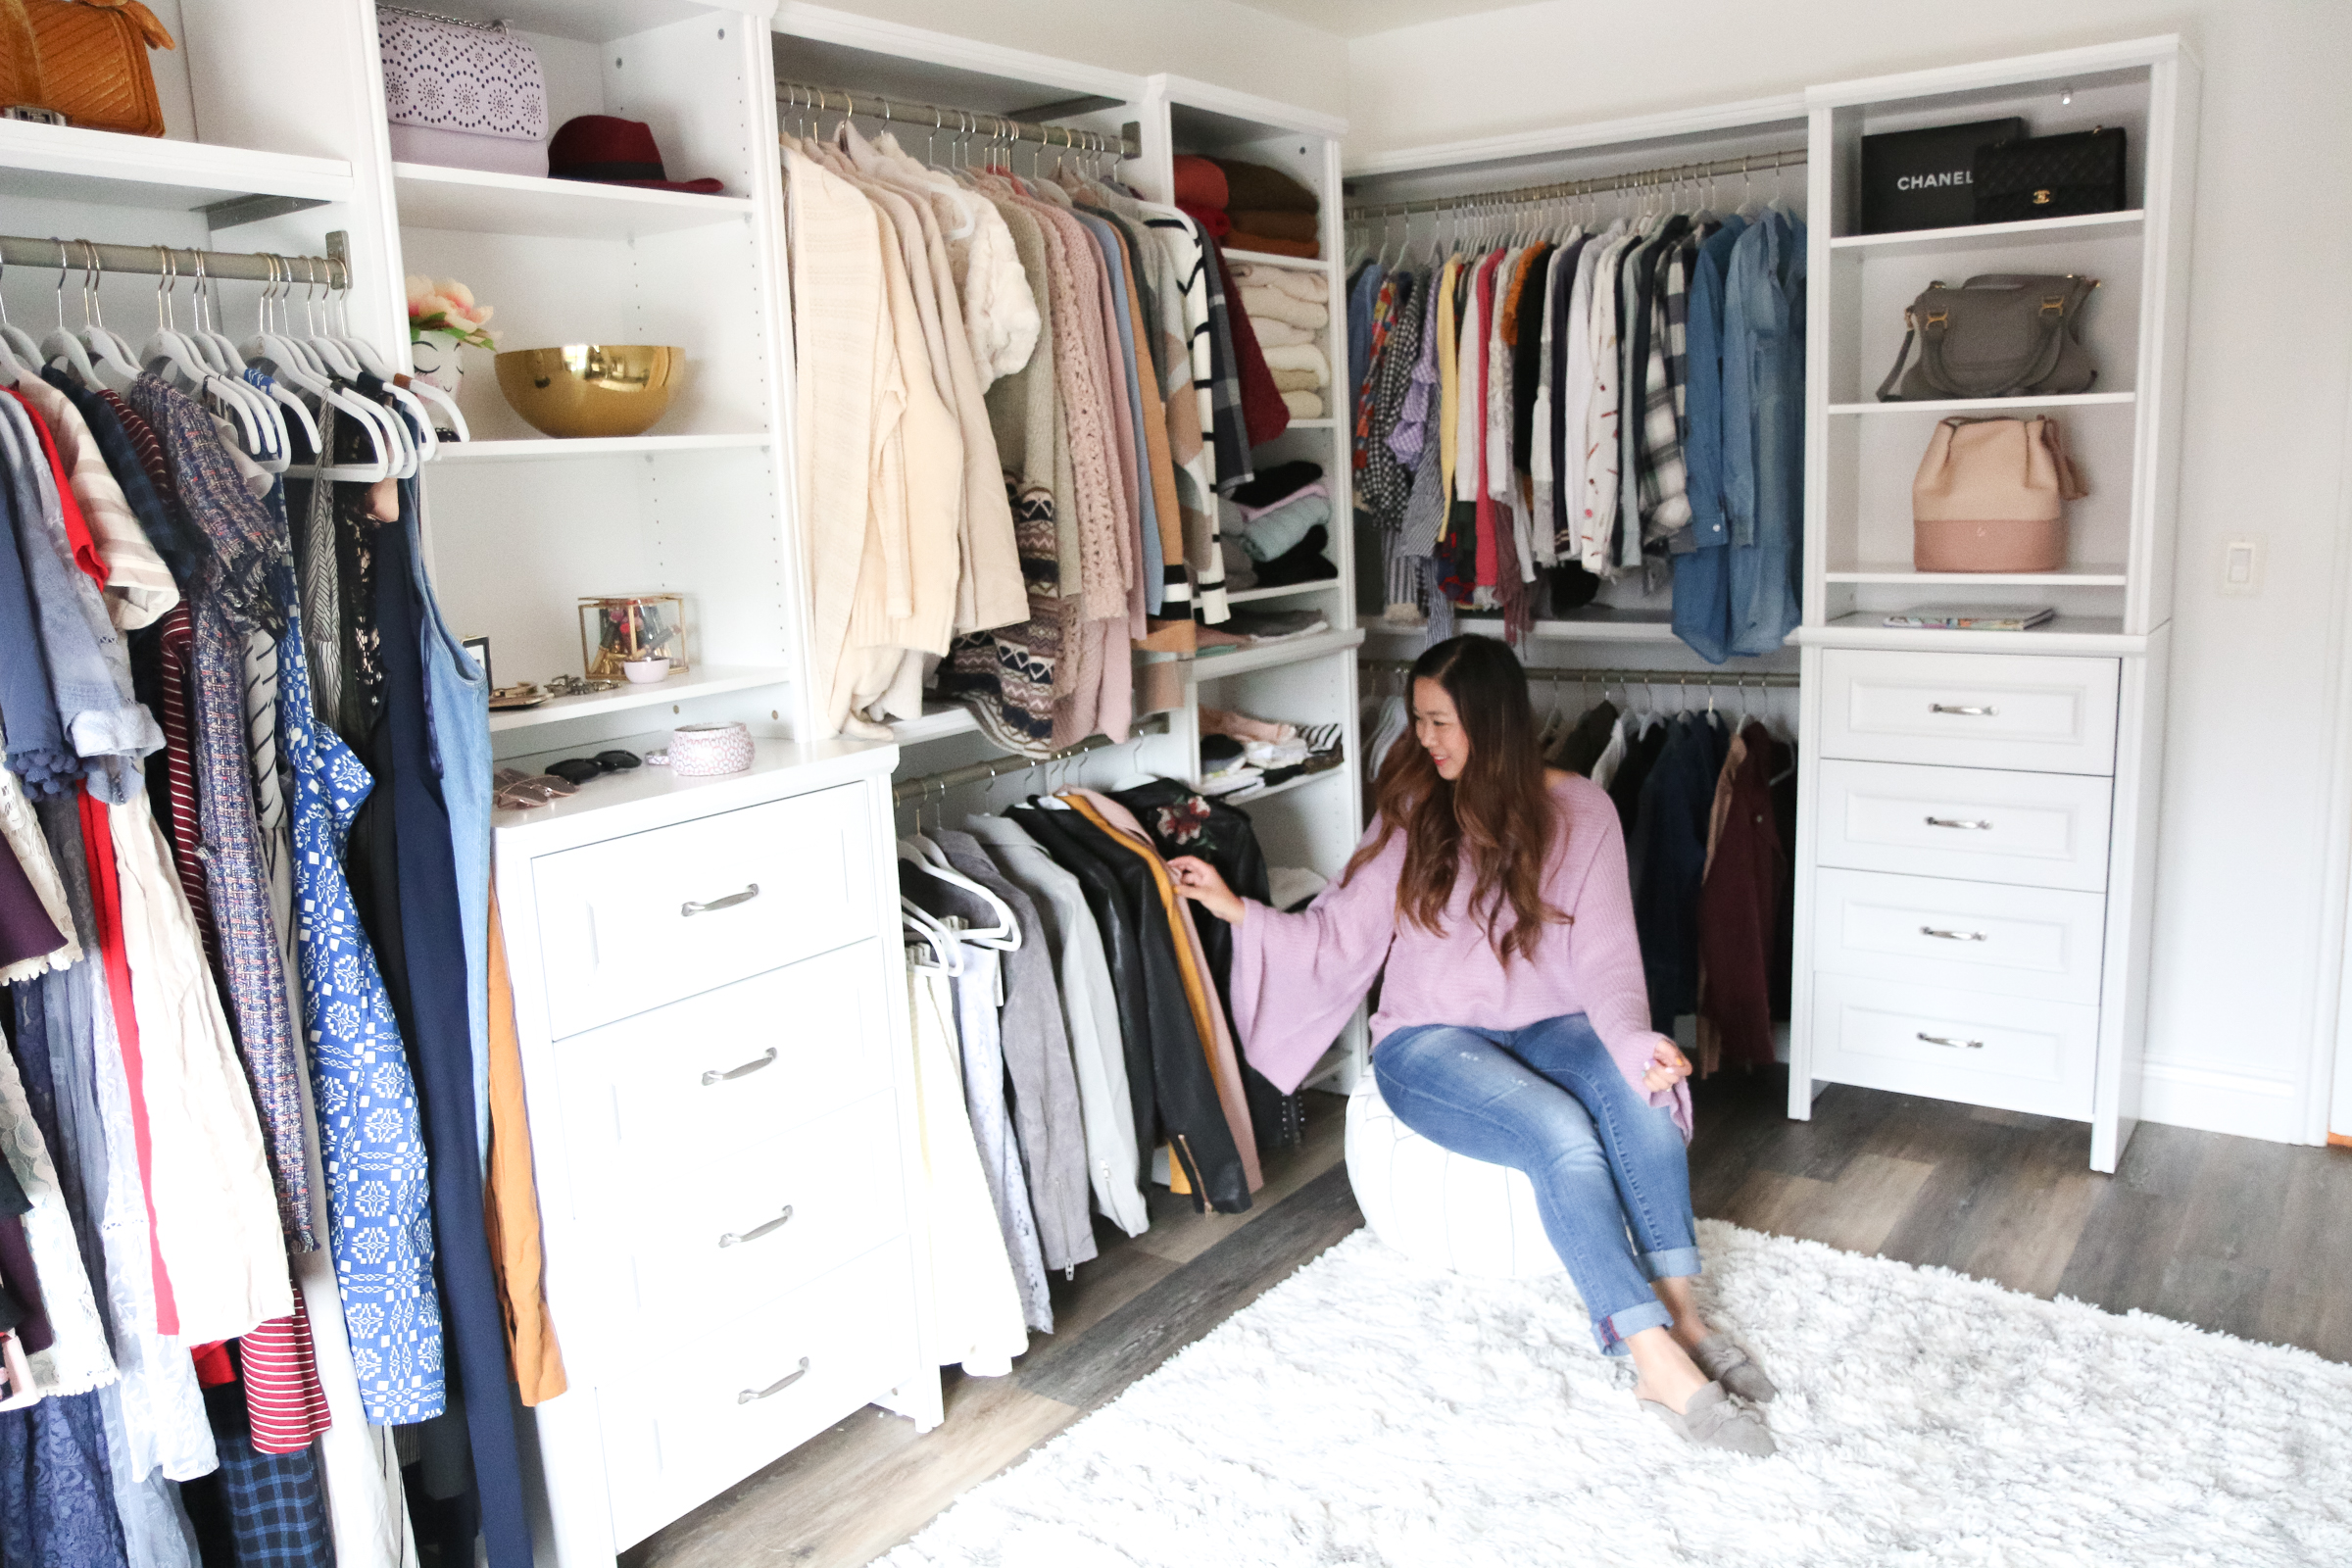 Our New Home Big Reveal: Closet / Office Room Ideas by Utah blogger Sandy A La Mode